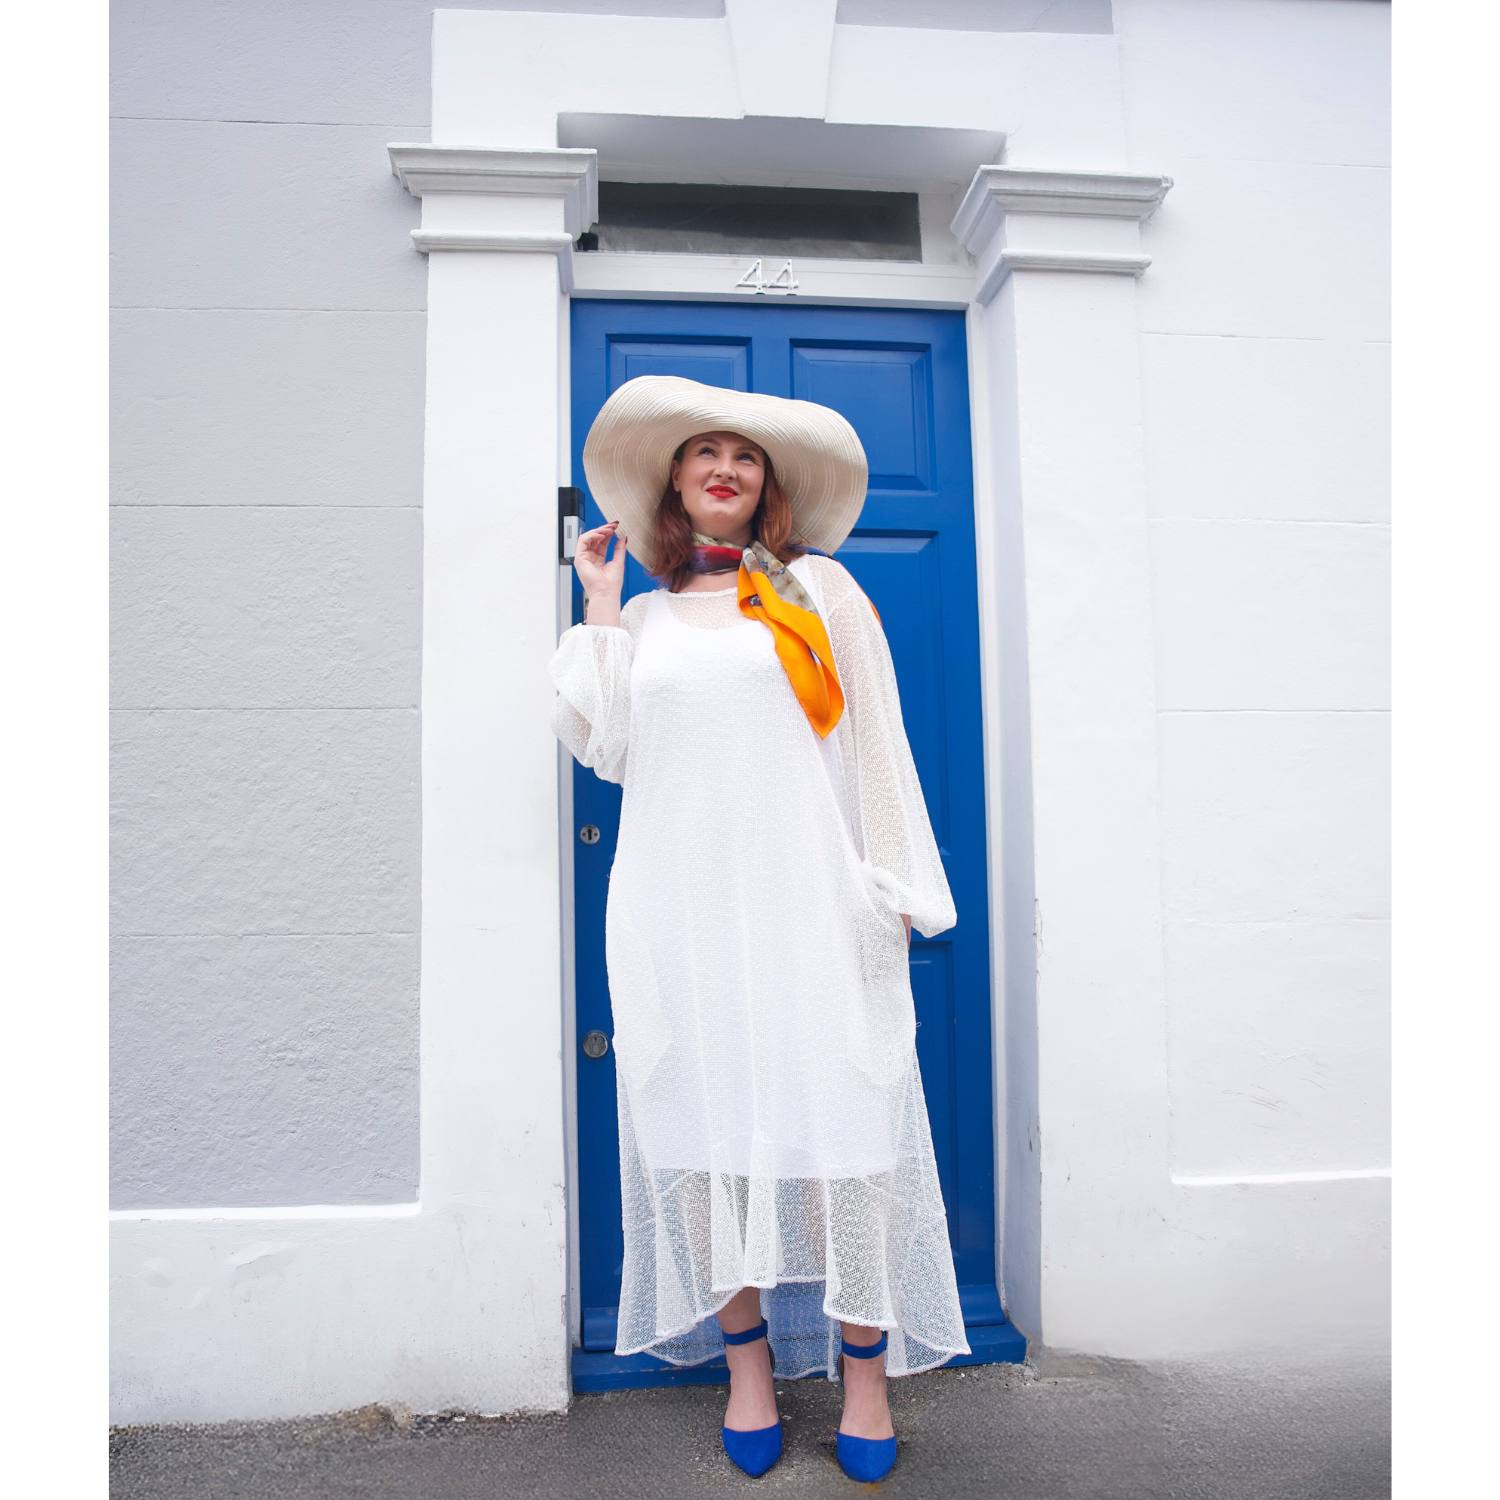 Women's Plus Size Aphrodite White Holiday Resort Dress with a white undergarment, paired with a white sunhat, the Cherry Blossom Silk Scarf and blue heels.